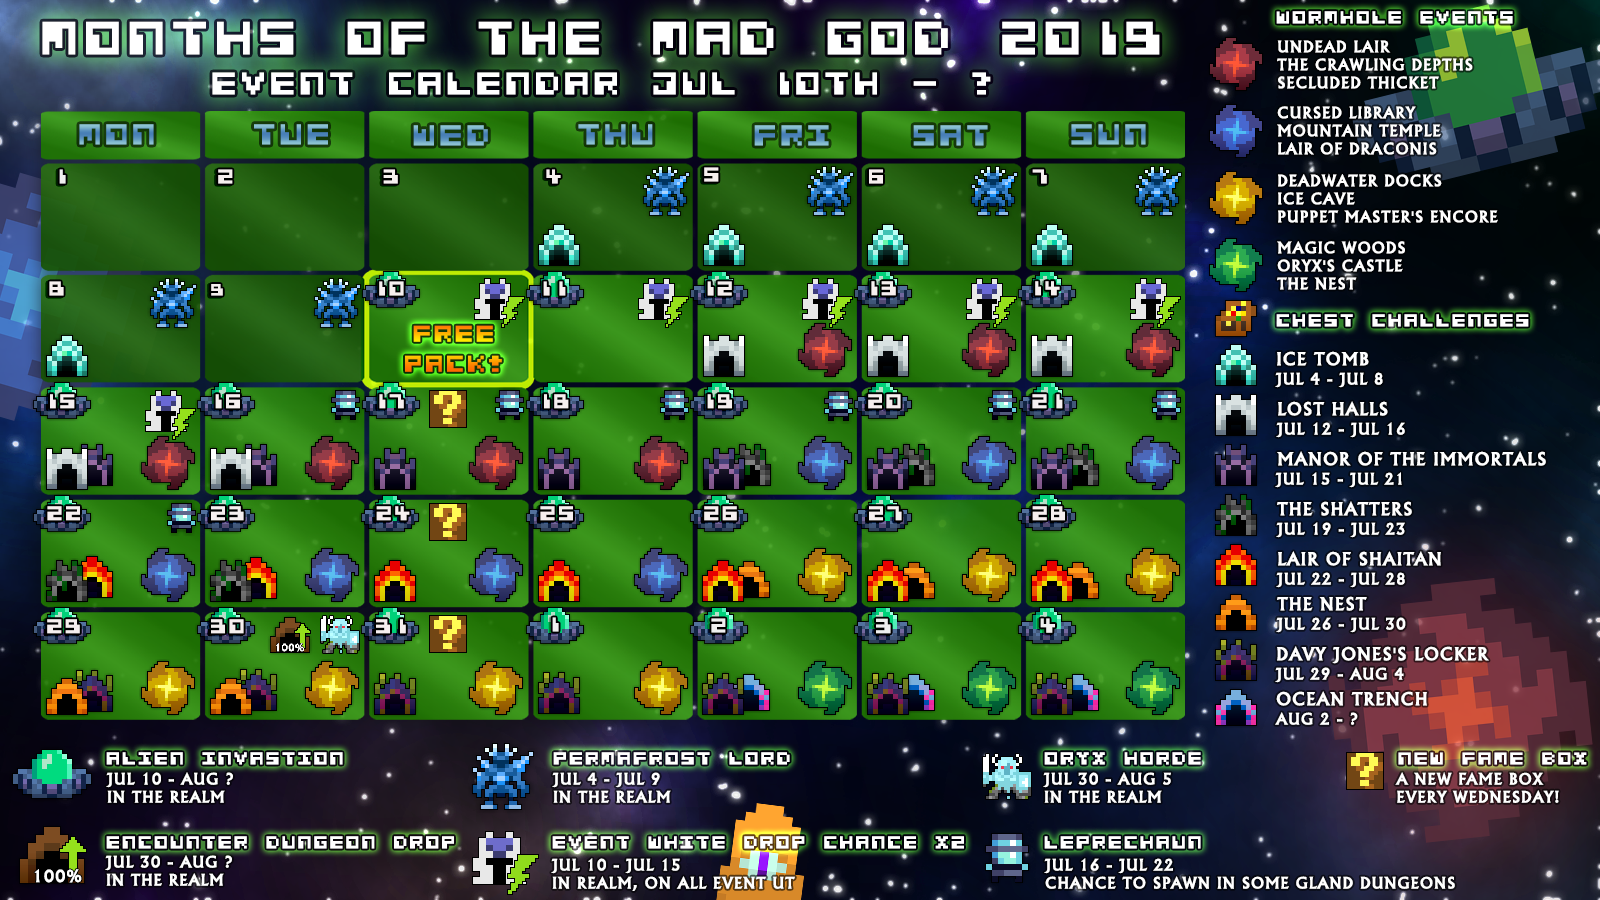 Steam :: Realm the Mad God :: Patch X.31.8 - Month of the Mad God: Invasion